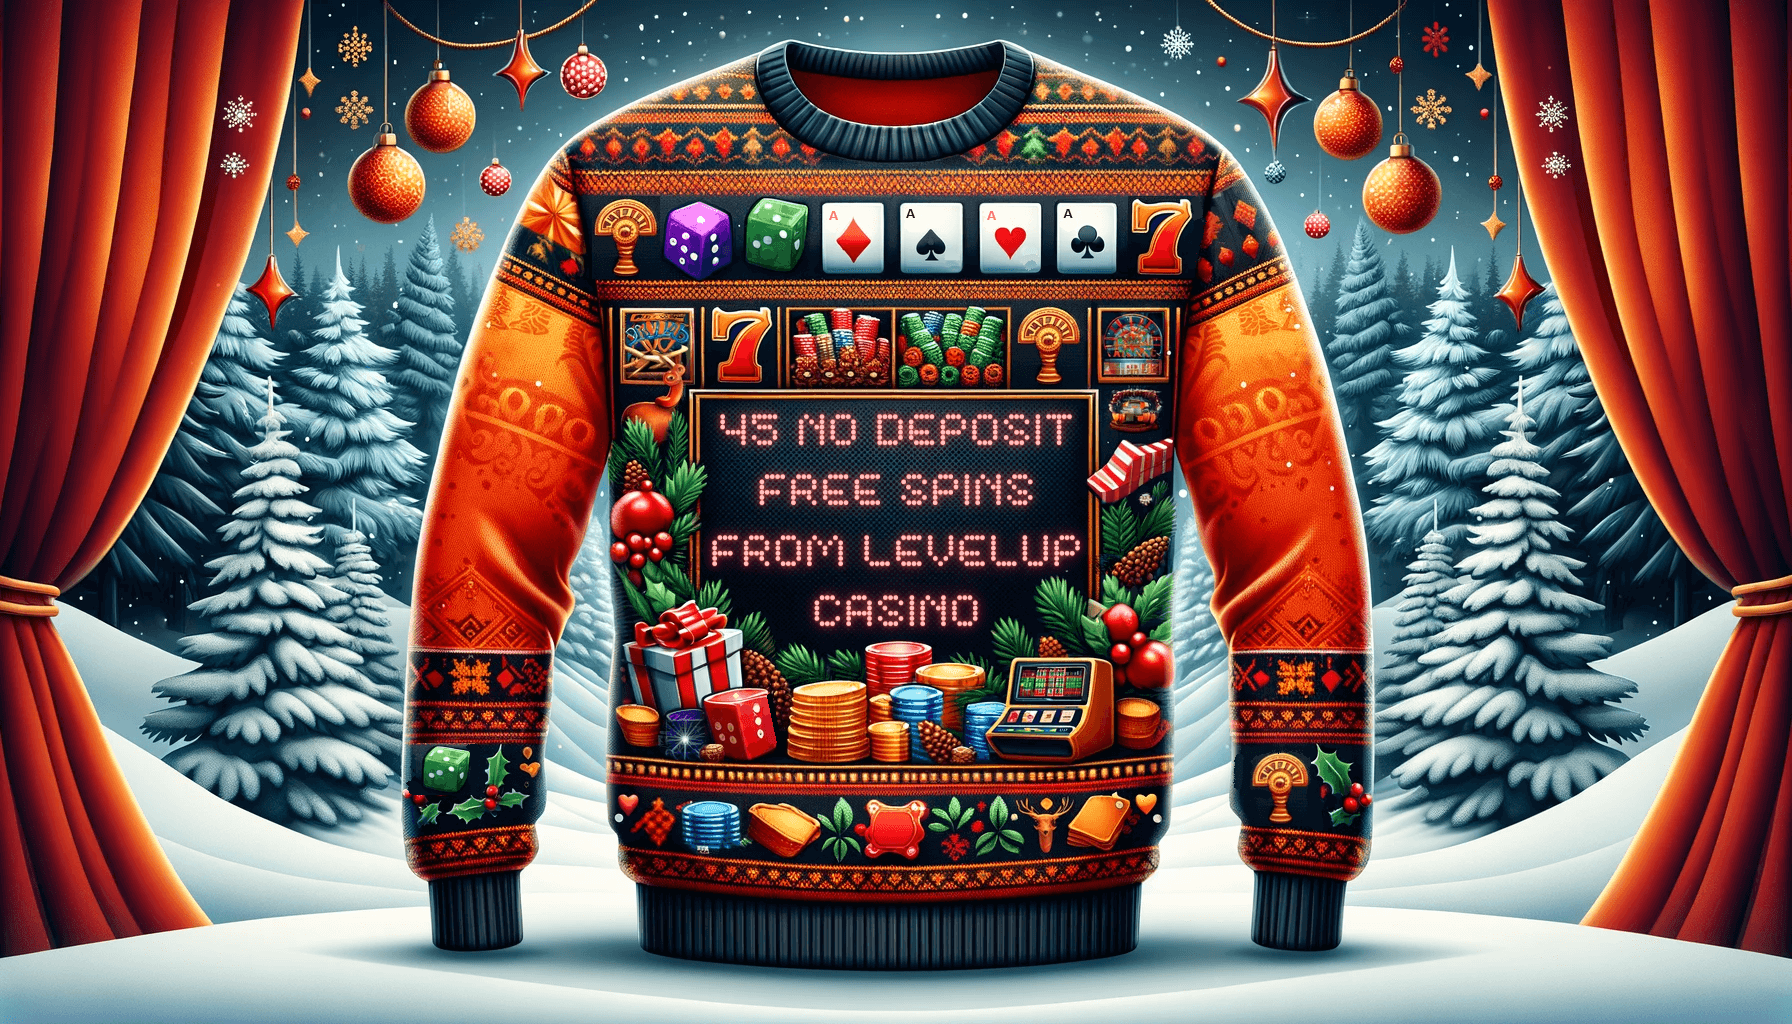 A christmas sweater bears the message: 45 No Deposit Free Spins at LevelUp Casino